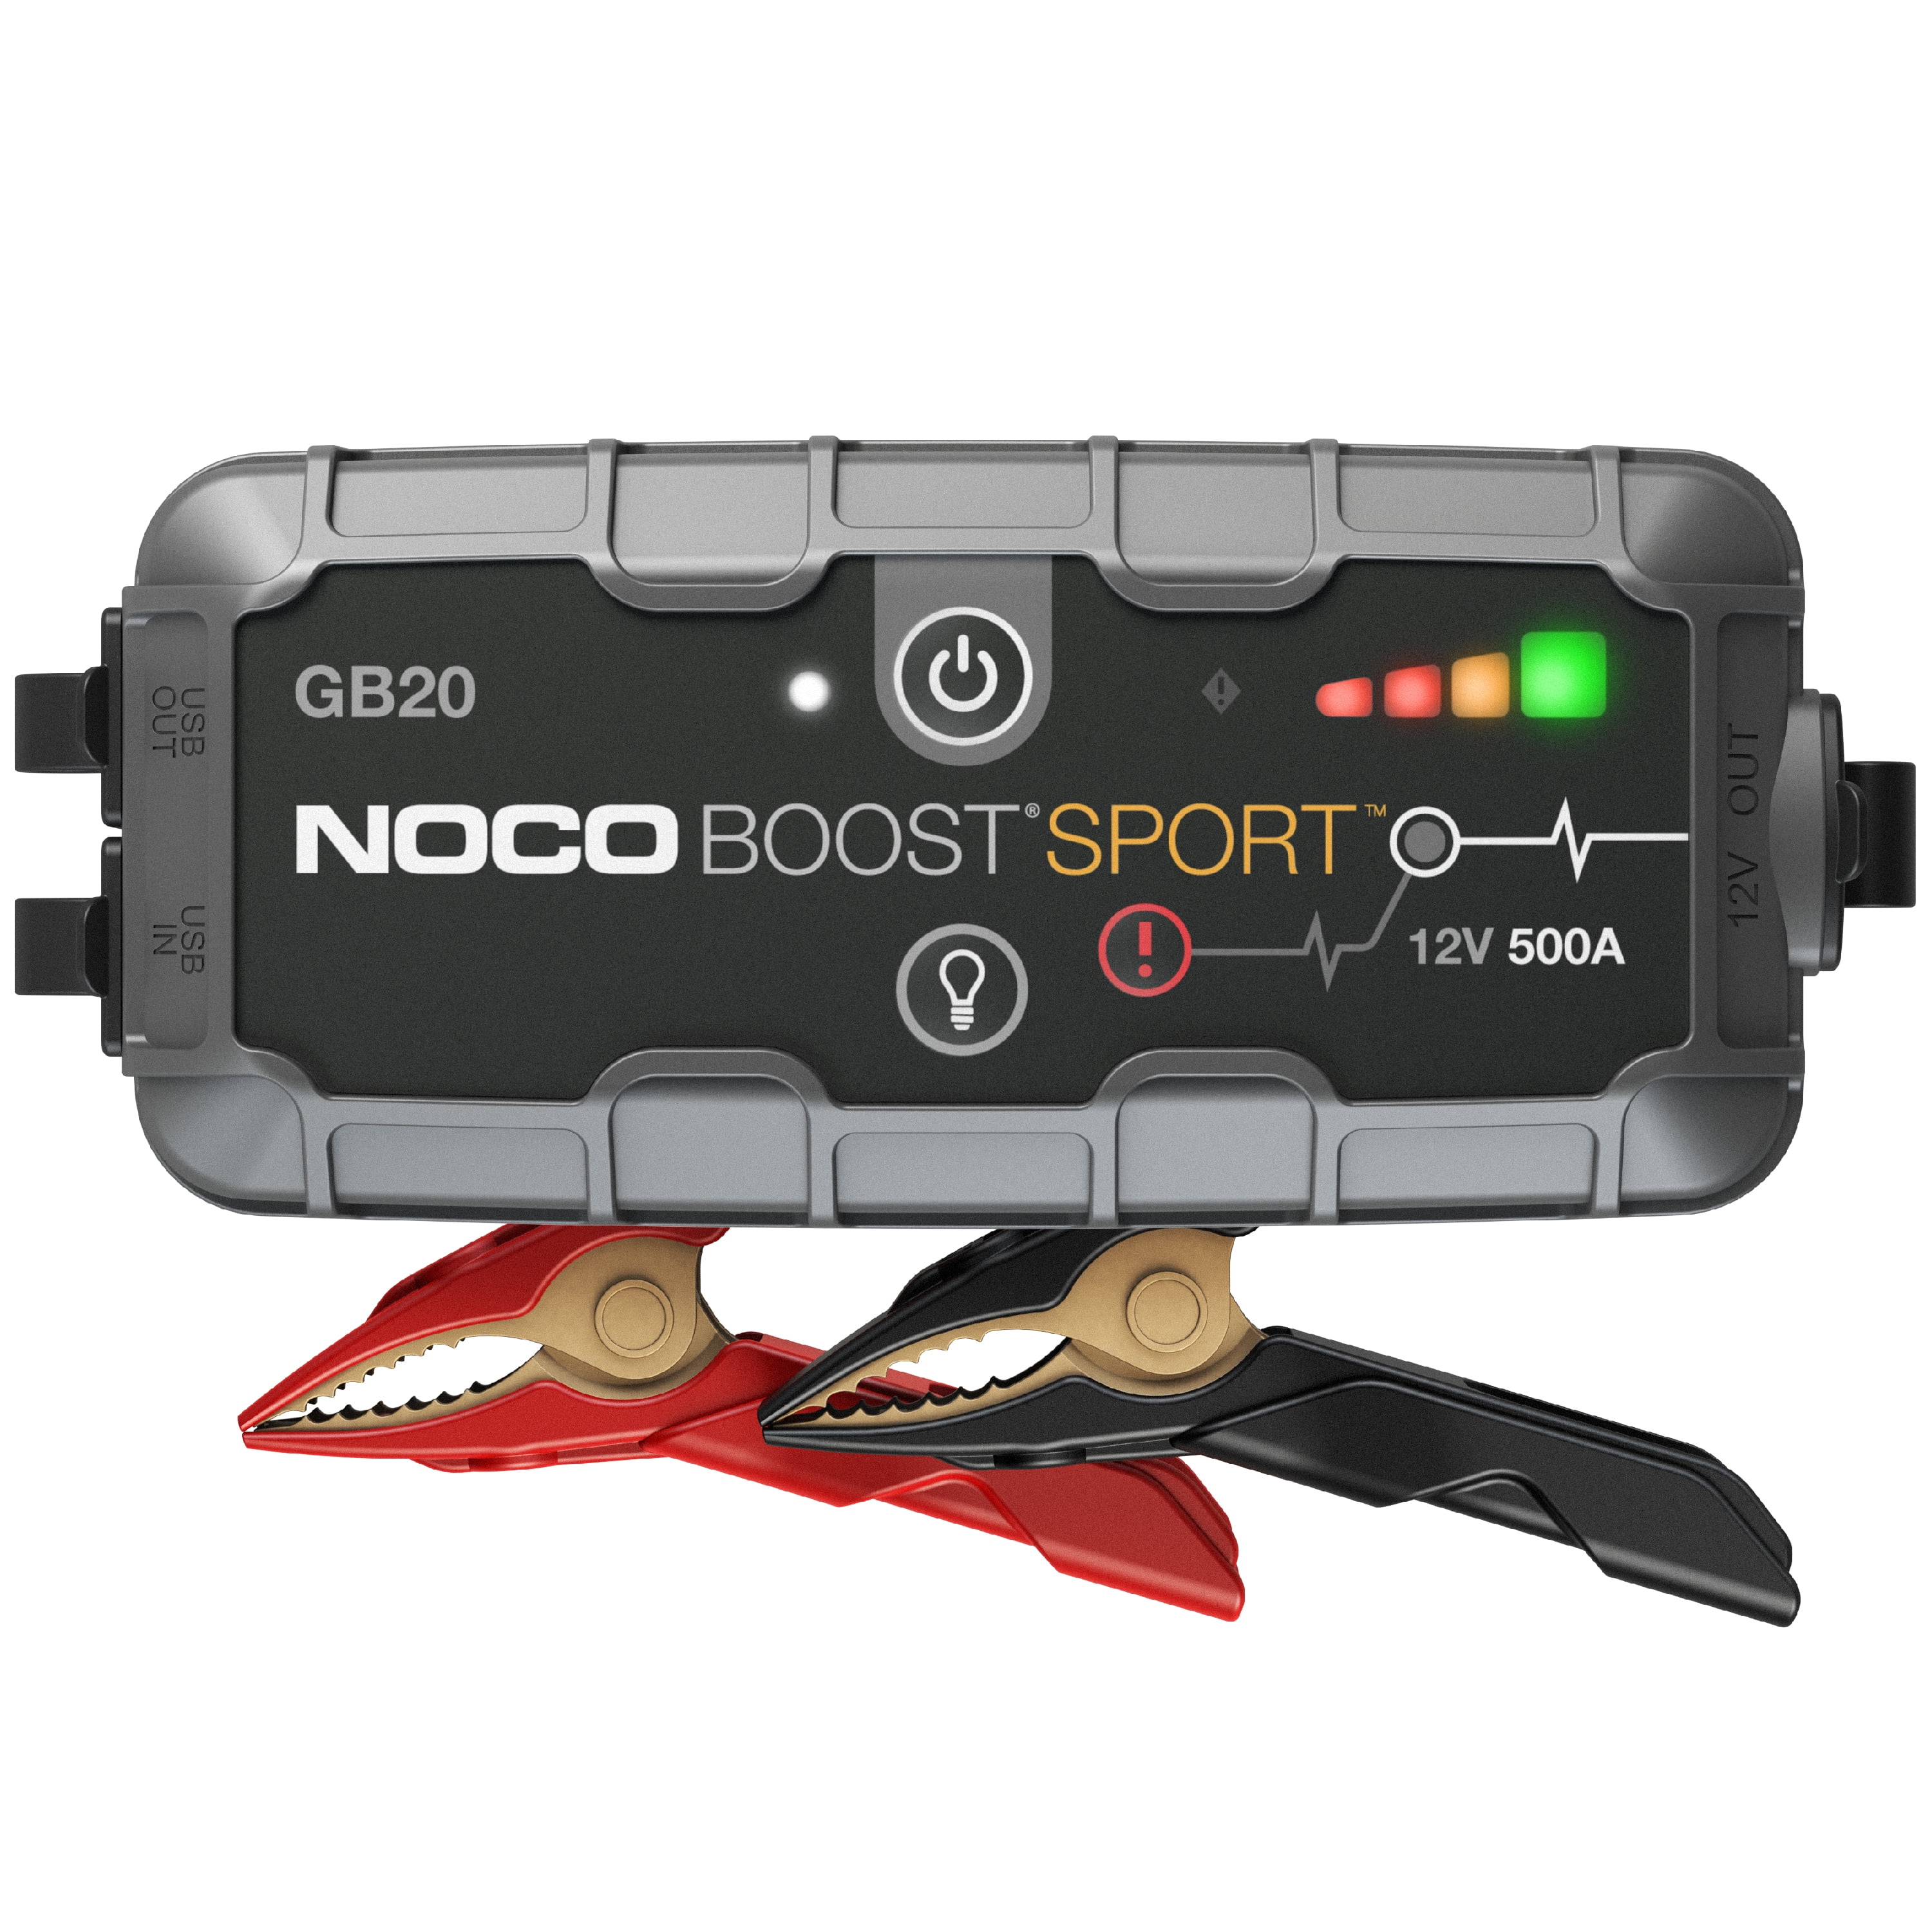 NOCO Boost Sport GB20, 12V 500A Booster Batterie Voiture